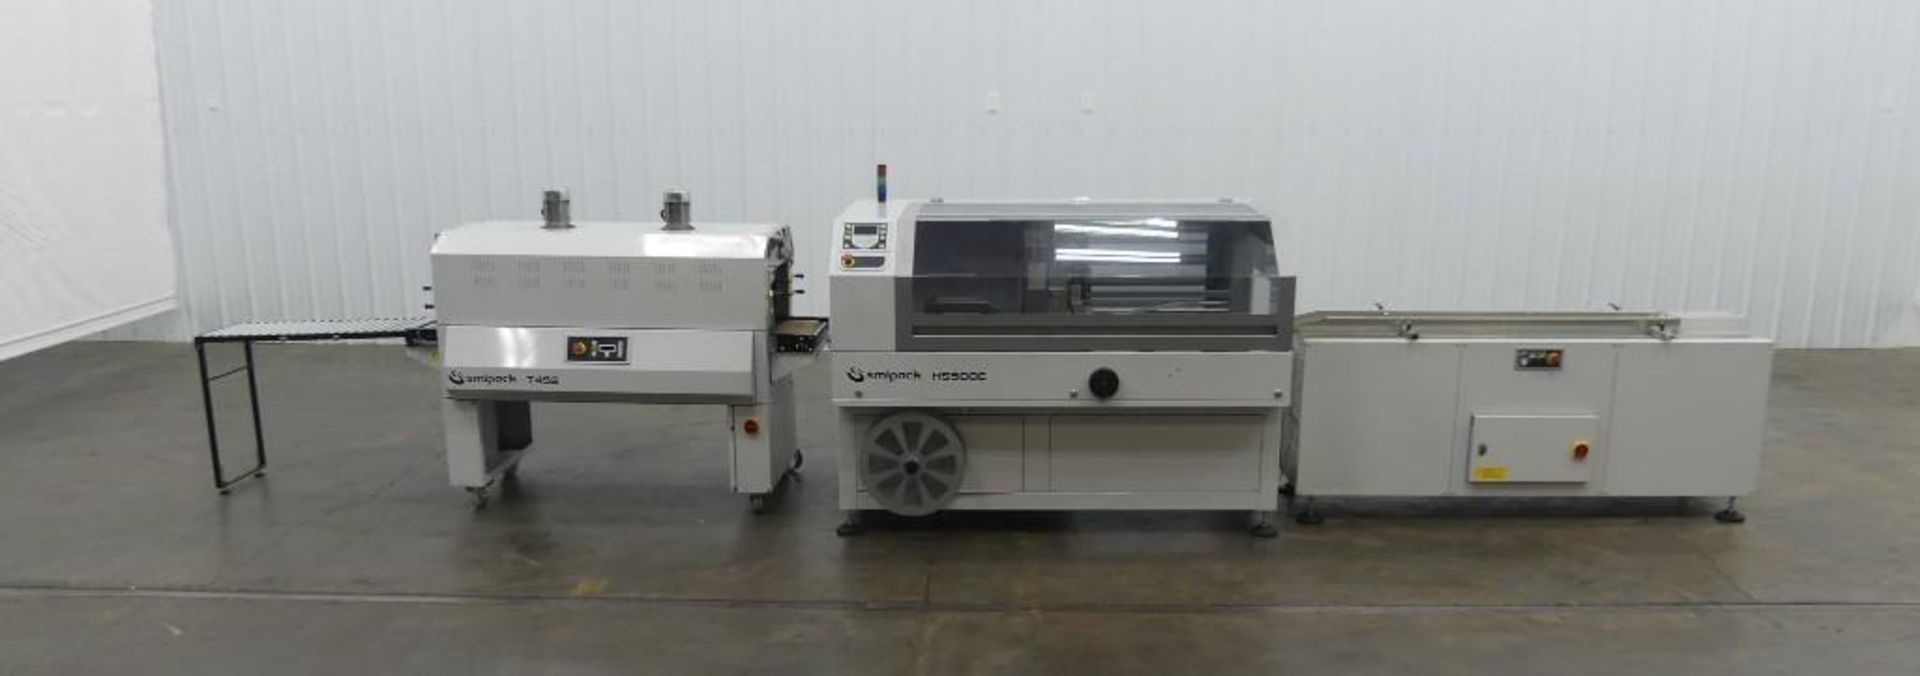 Smipack HS500E Automatic Side Sealer with Infeed and Shrink Tunnel - Image 49 of 76